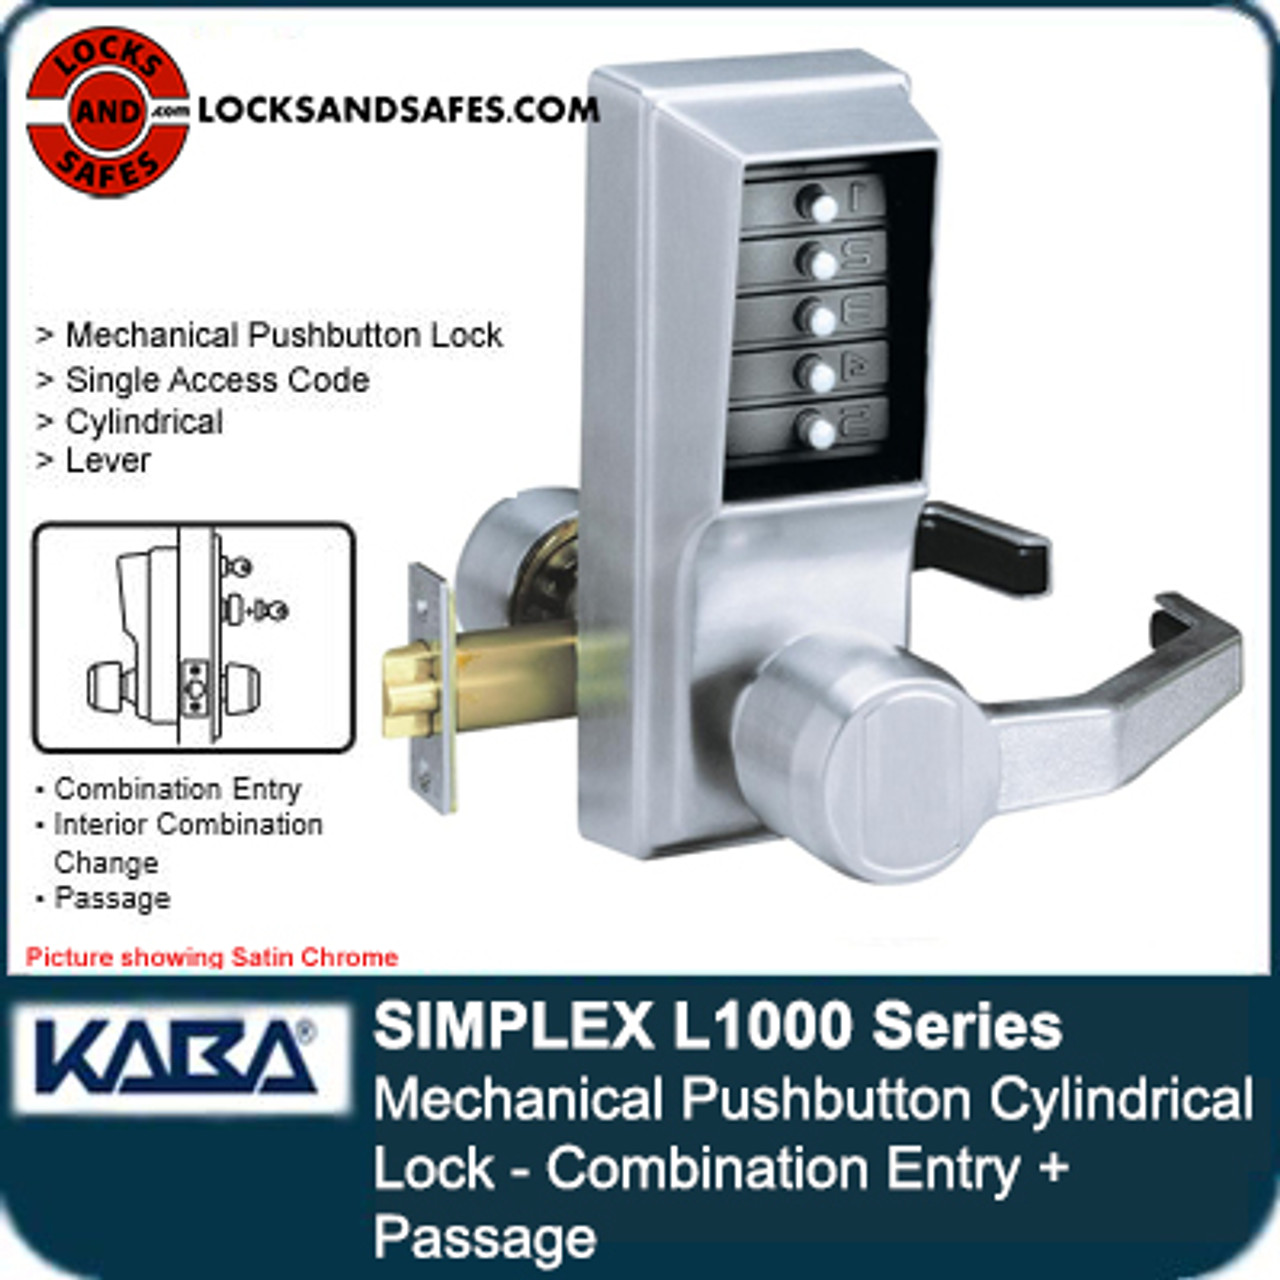 Kaba Simplex L1000 Series Metal Mechanical Pushbutton Cylindrical Lock with  Lever, Key Override, 13mm Throw Latch, Floating Face Plate, 70mm Backset,  通販